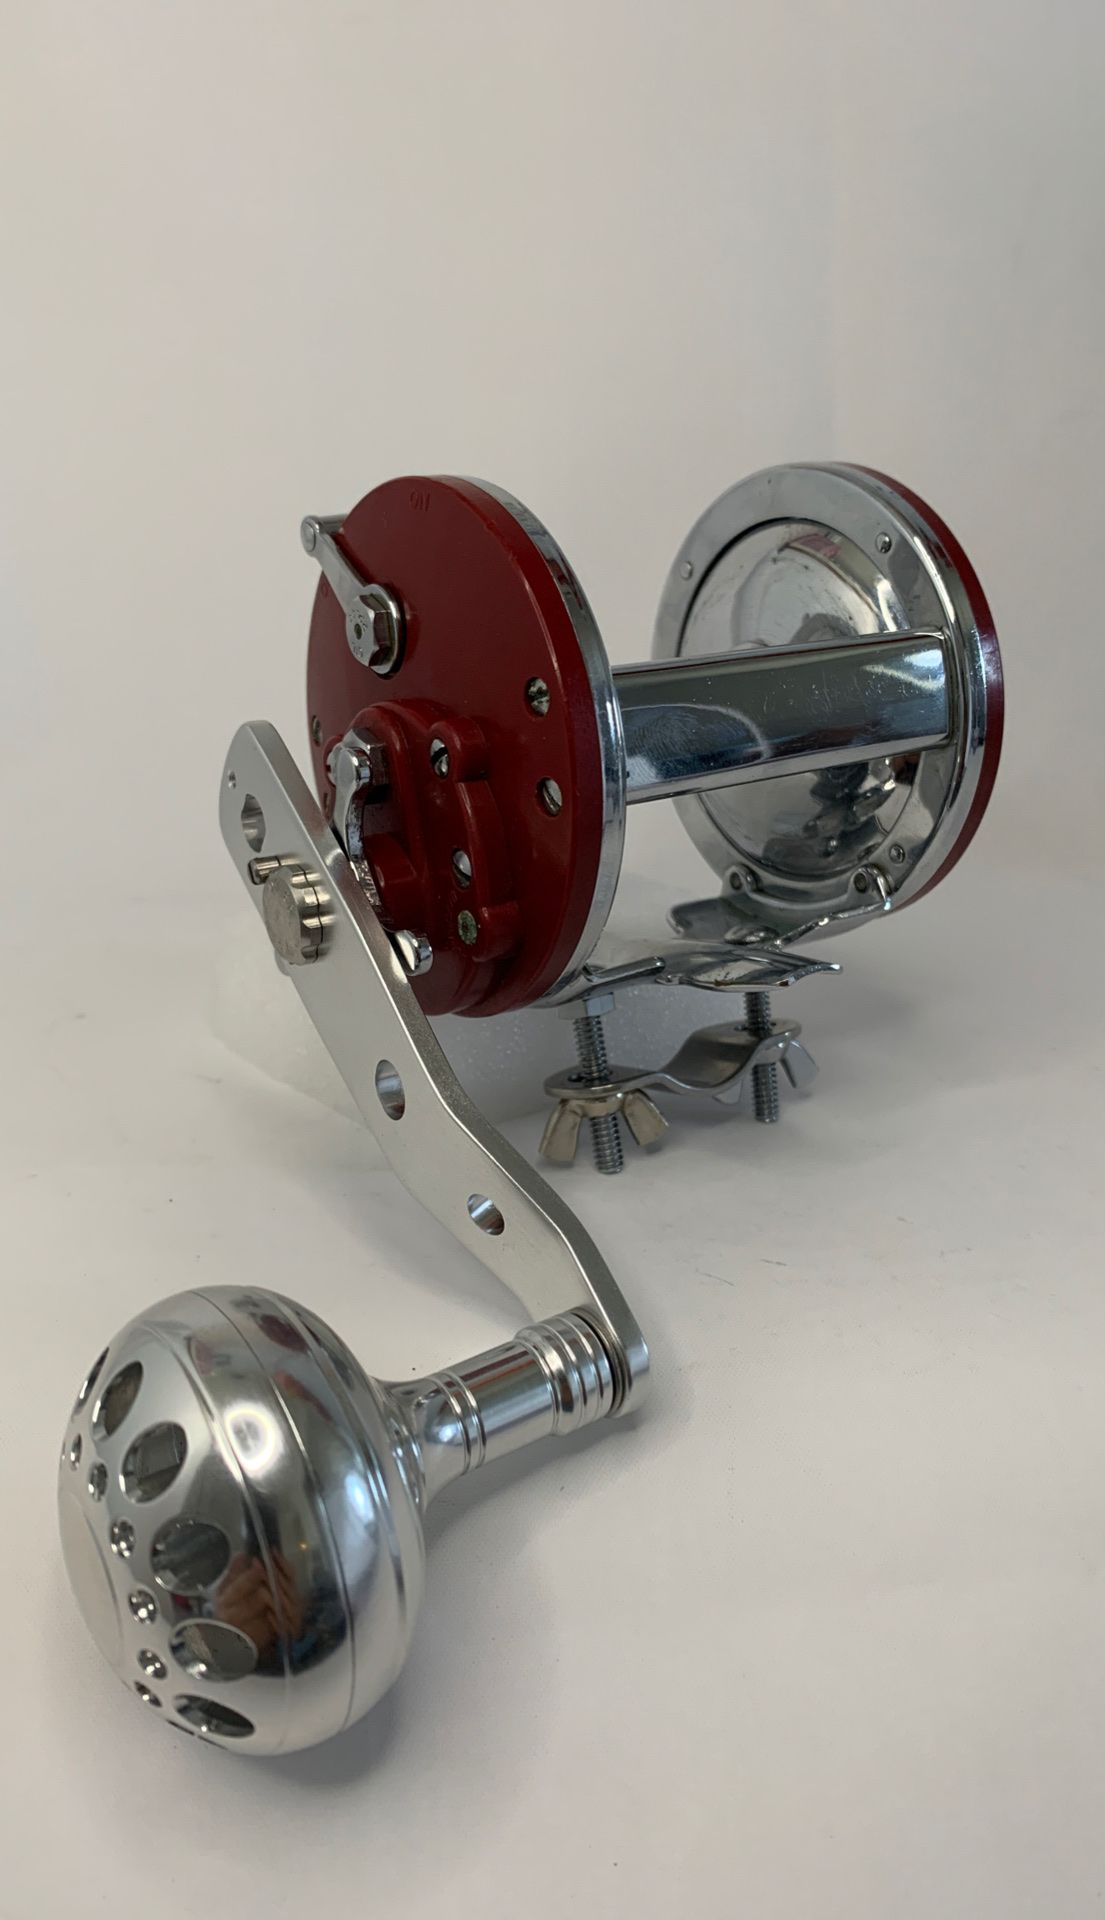 Penn 500S conventional fishing reel made in USA